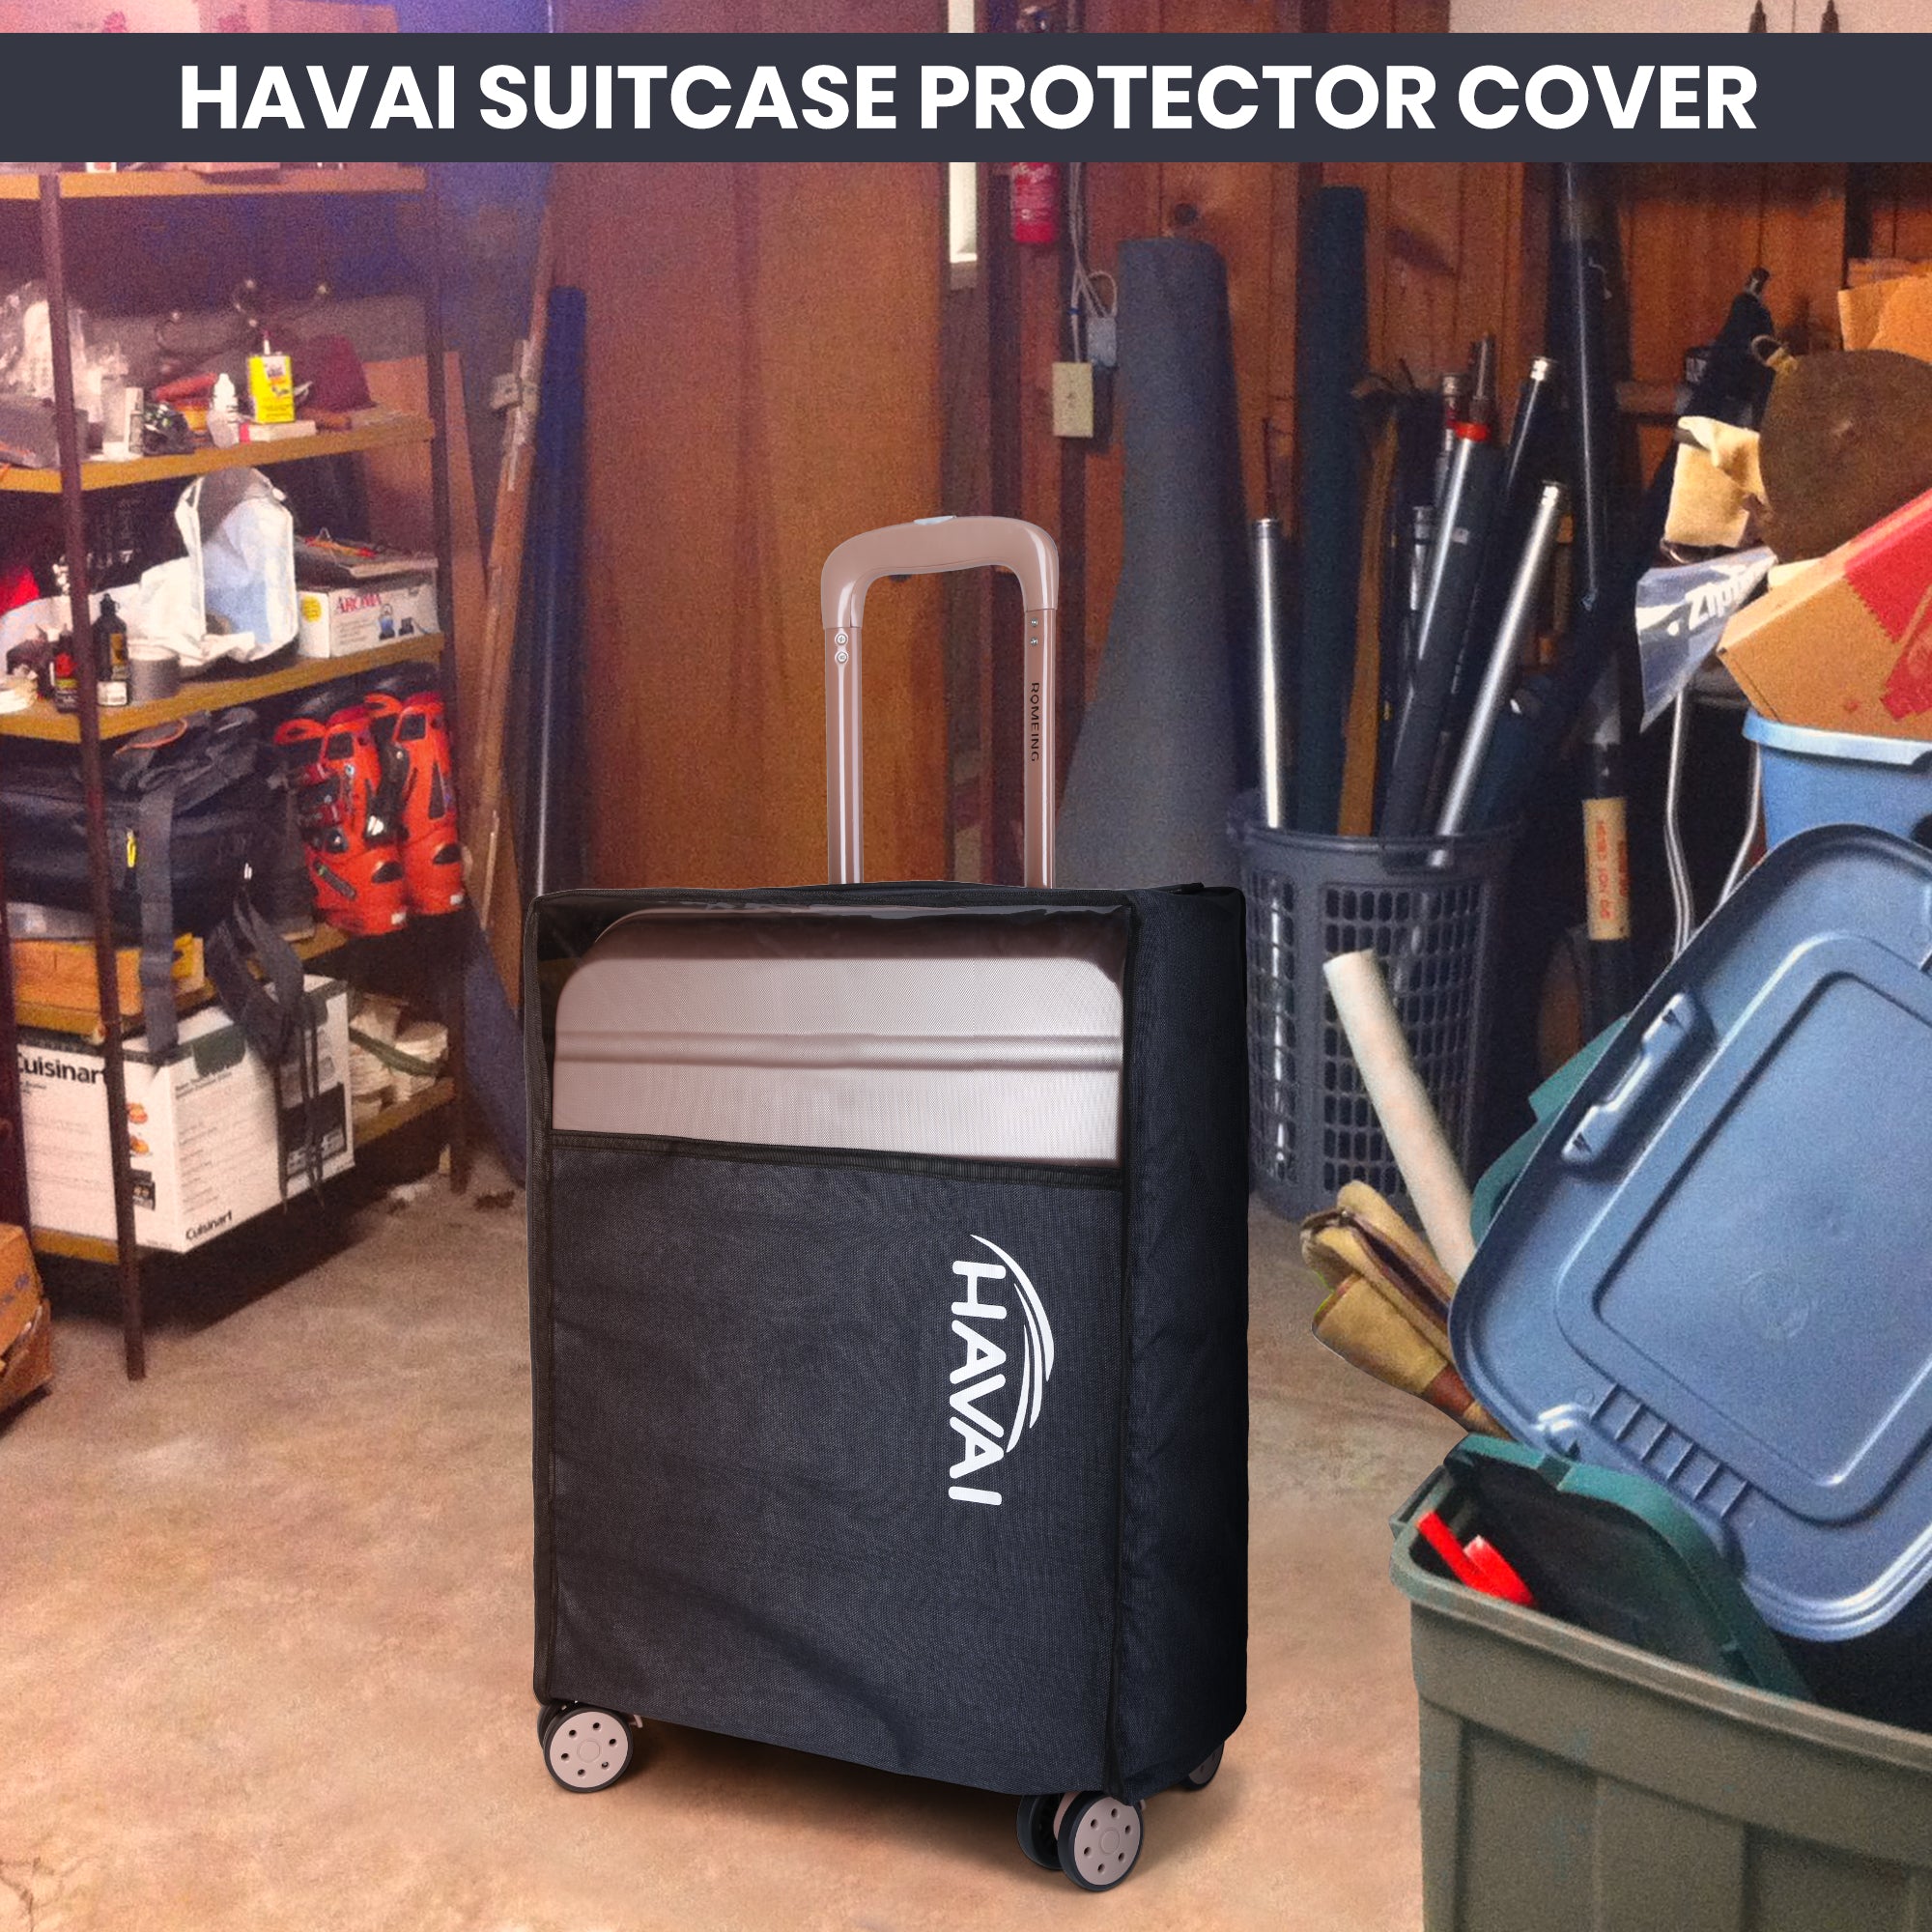 HAVAI Suitcase Storage Protector - Store your suitcase Safely (32 Inch), Navy Blue, Pack of 1